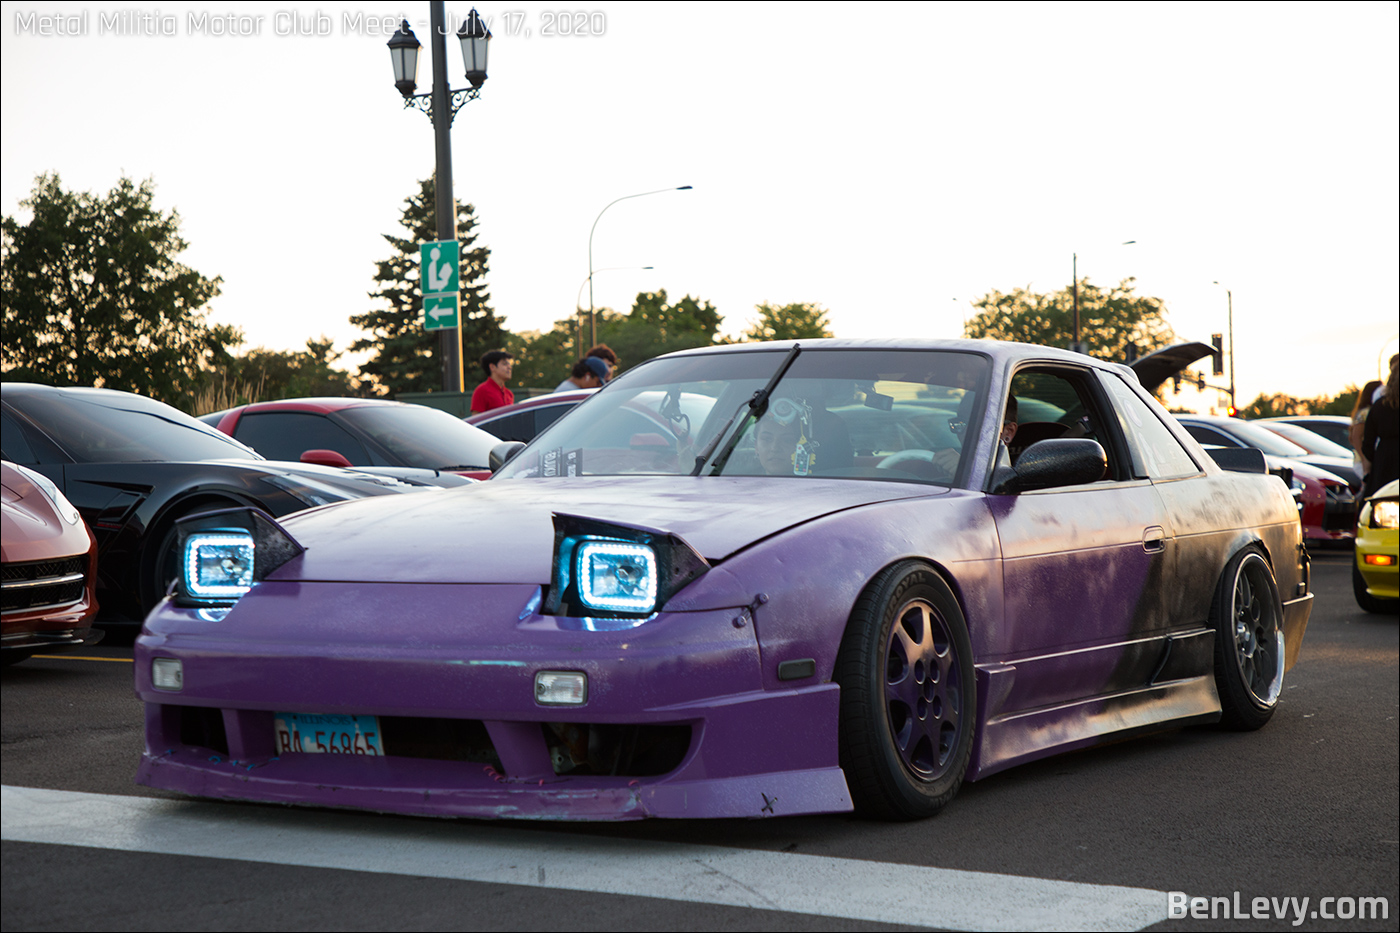 240SX Coupe in Rattle Can Purple